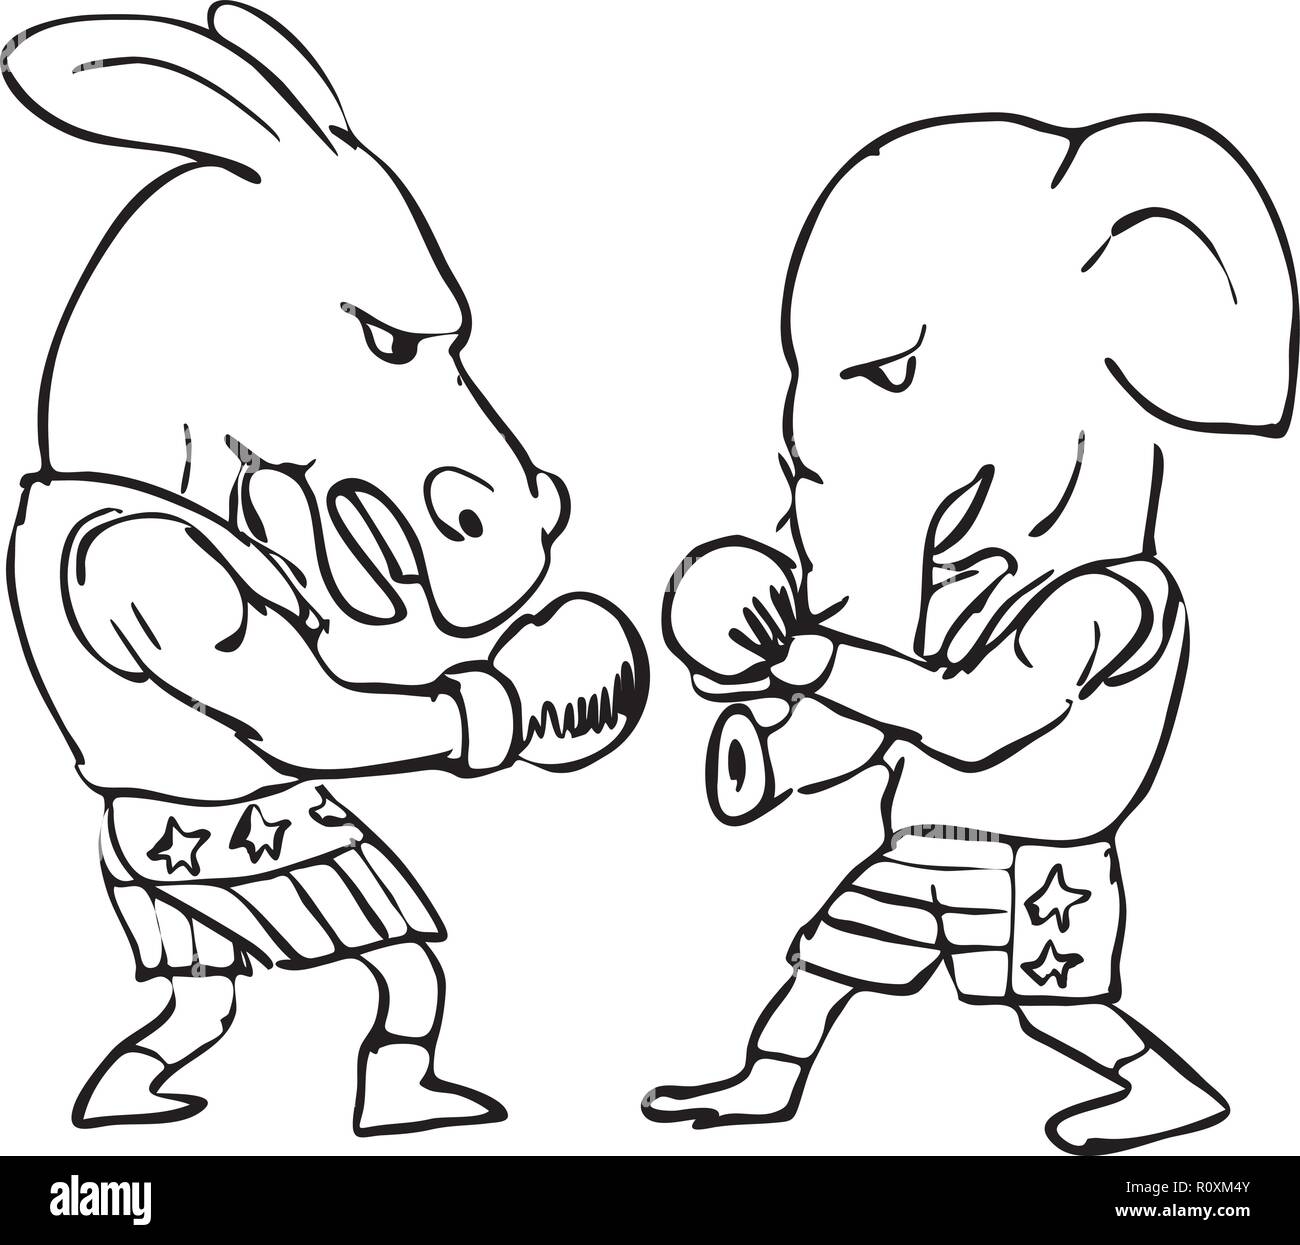 Illustration graphics showing a drawing of a donkey boxer and a elephant fighting in a boxing match wearing American stars and stripes shorts on white Stock Vector